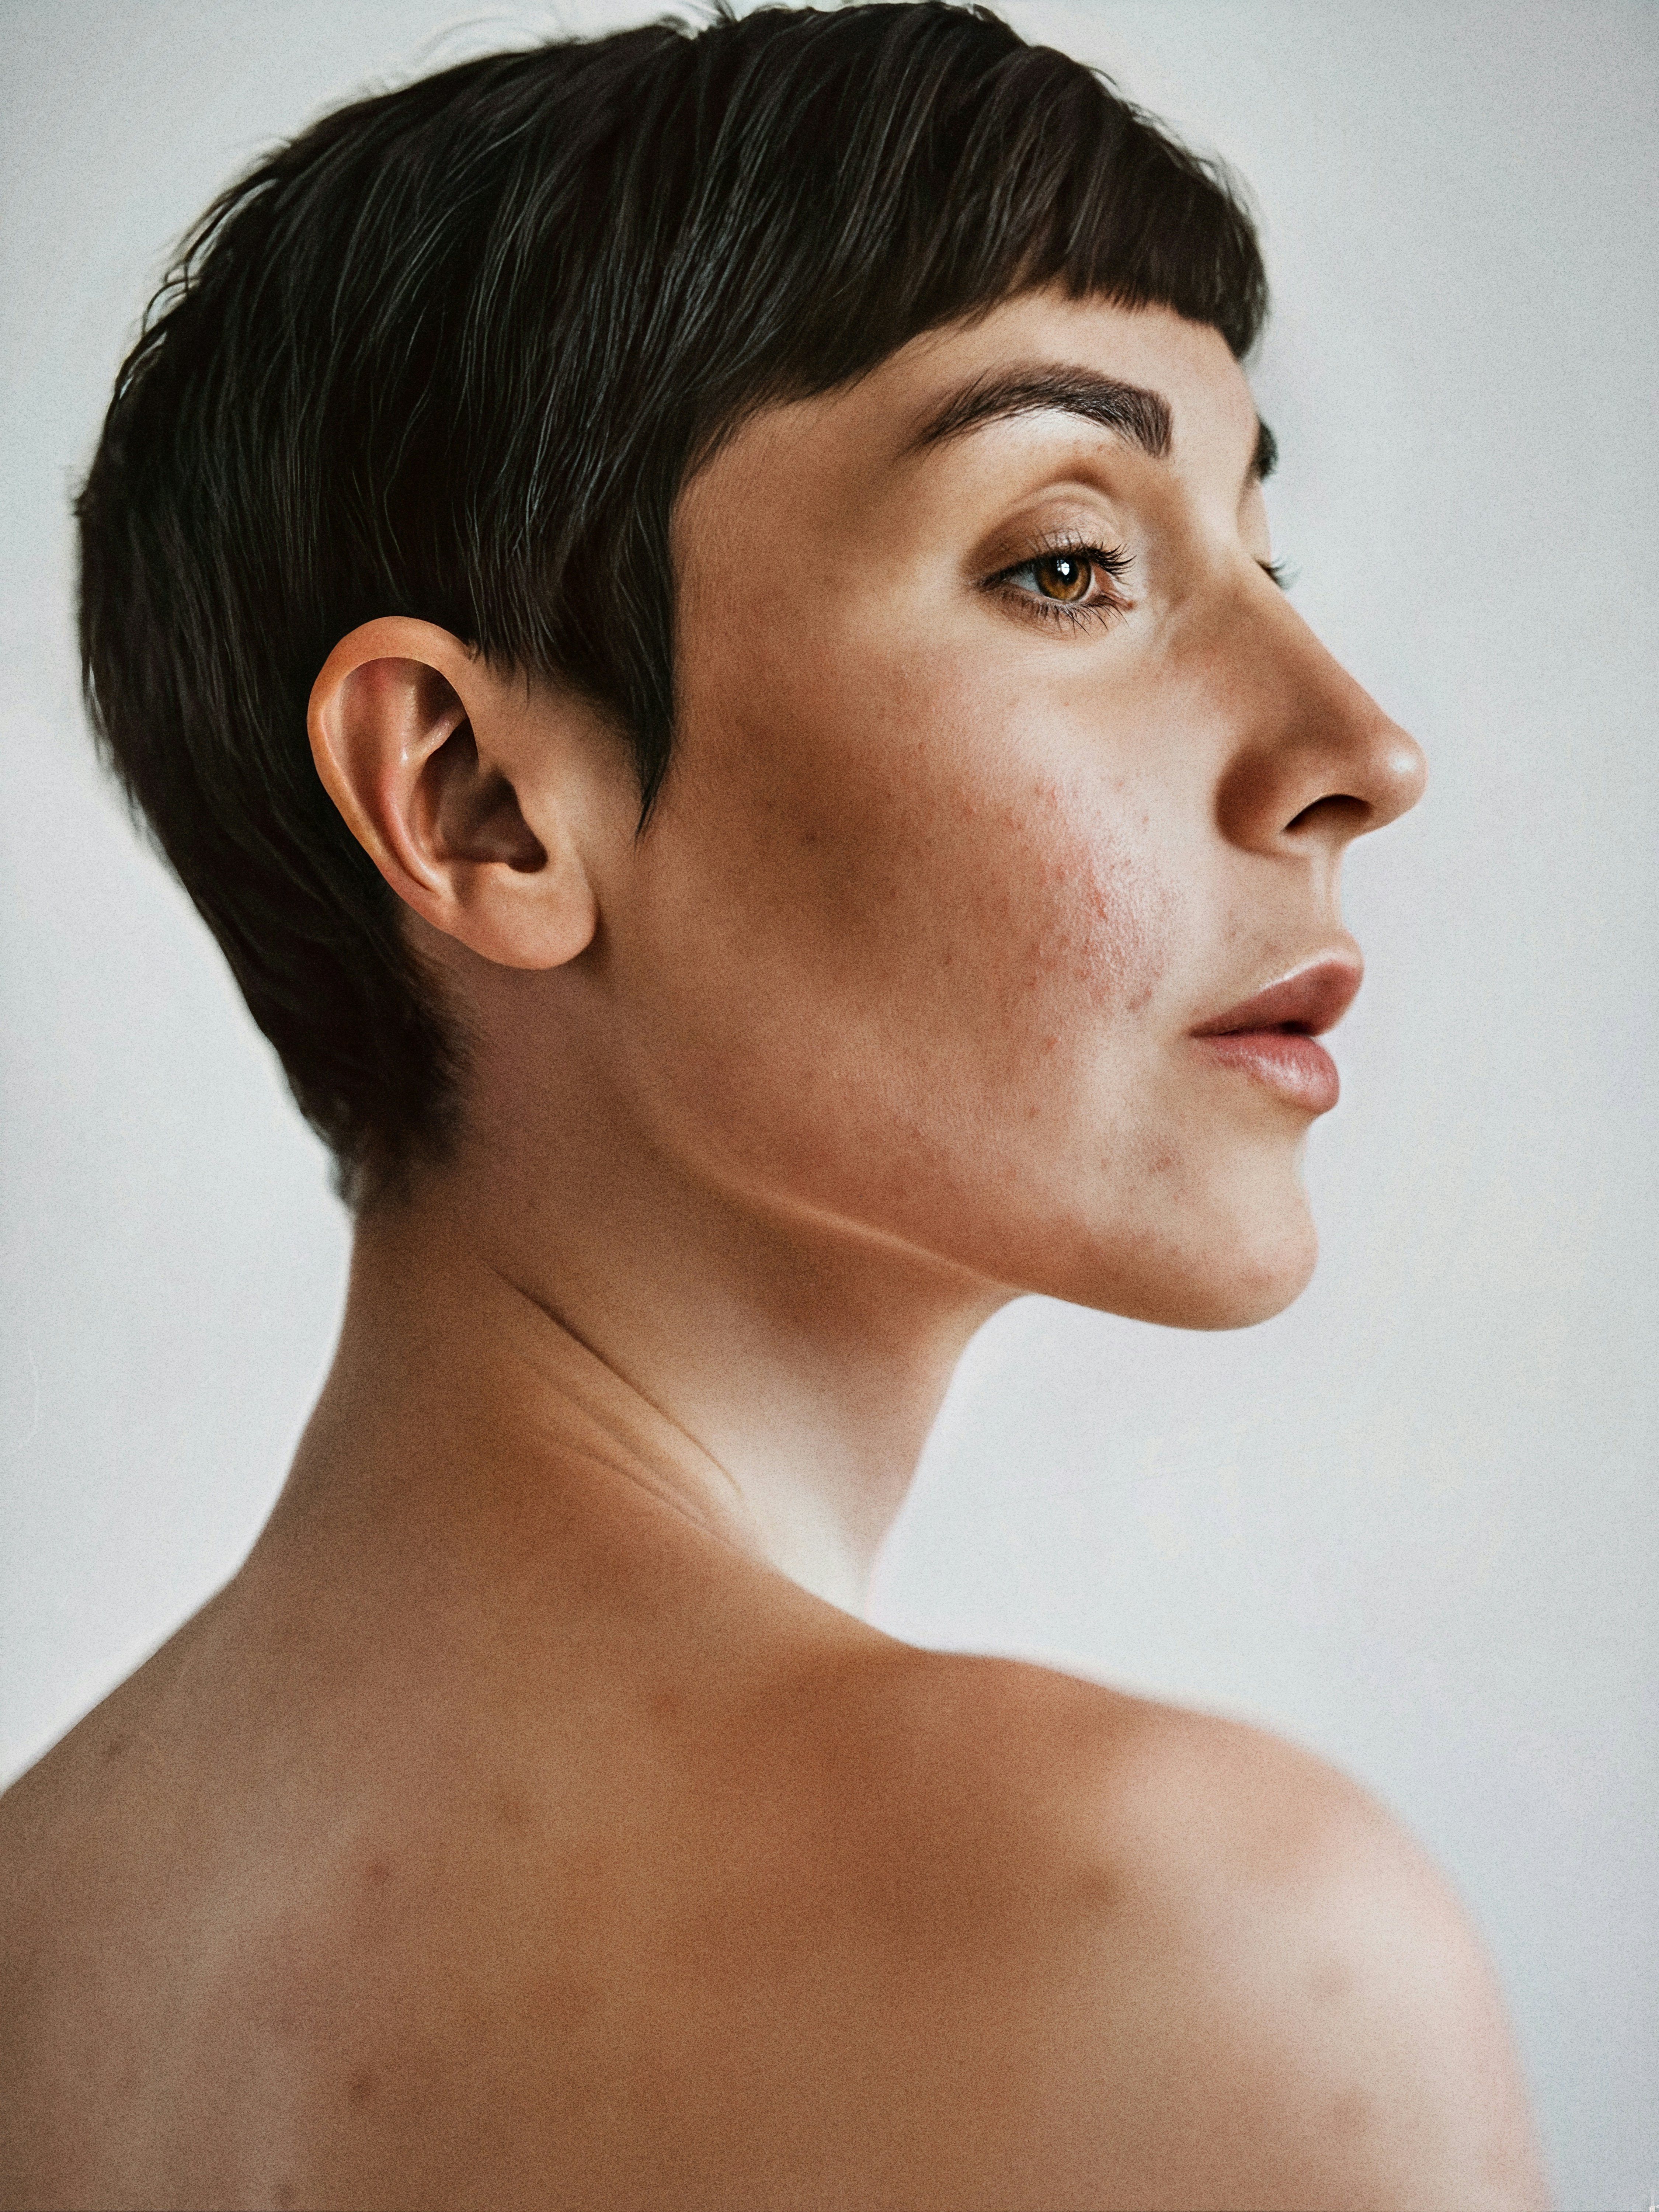 Ai generated portrait of female model with short dark hair and bare shoulders